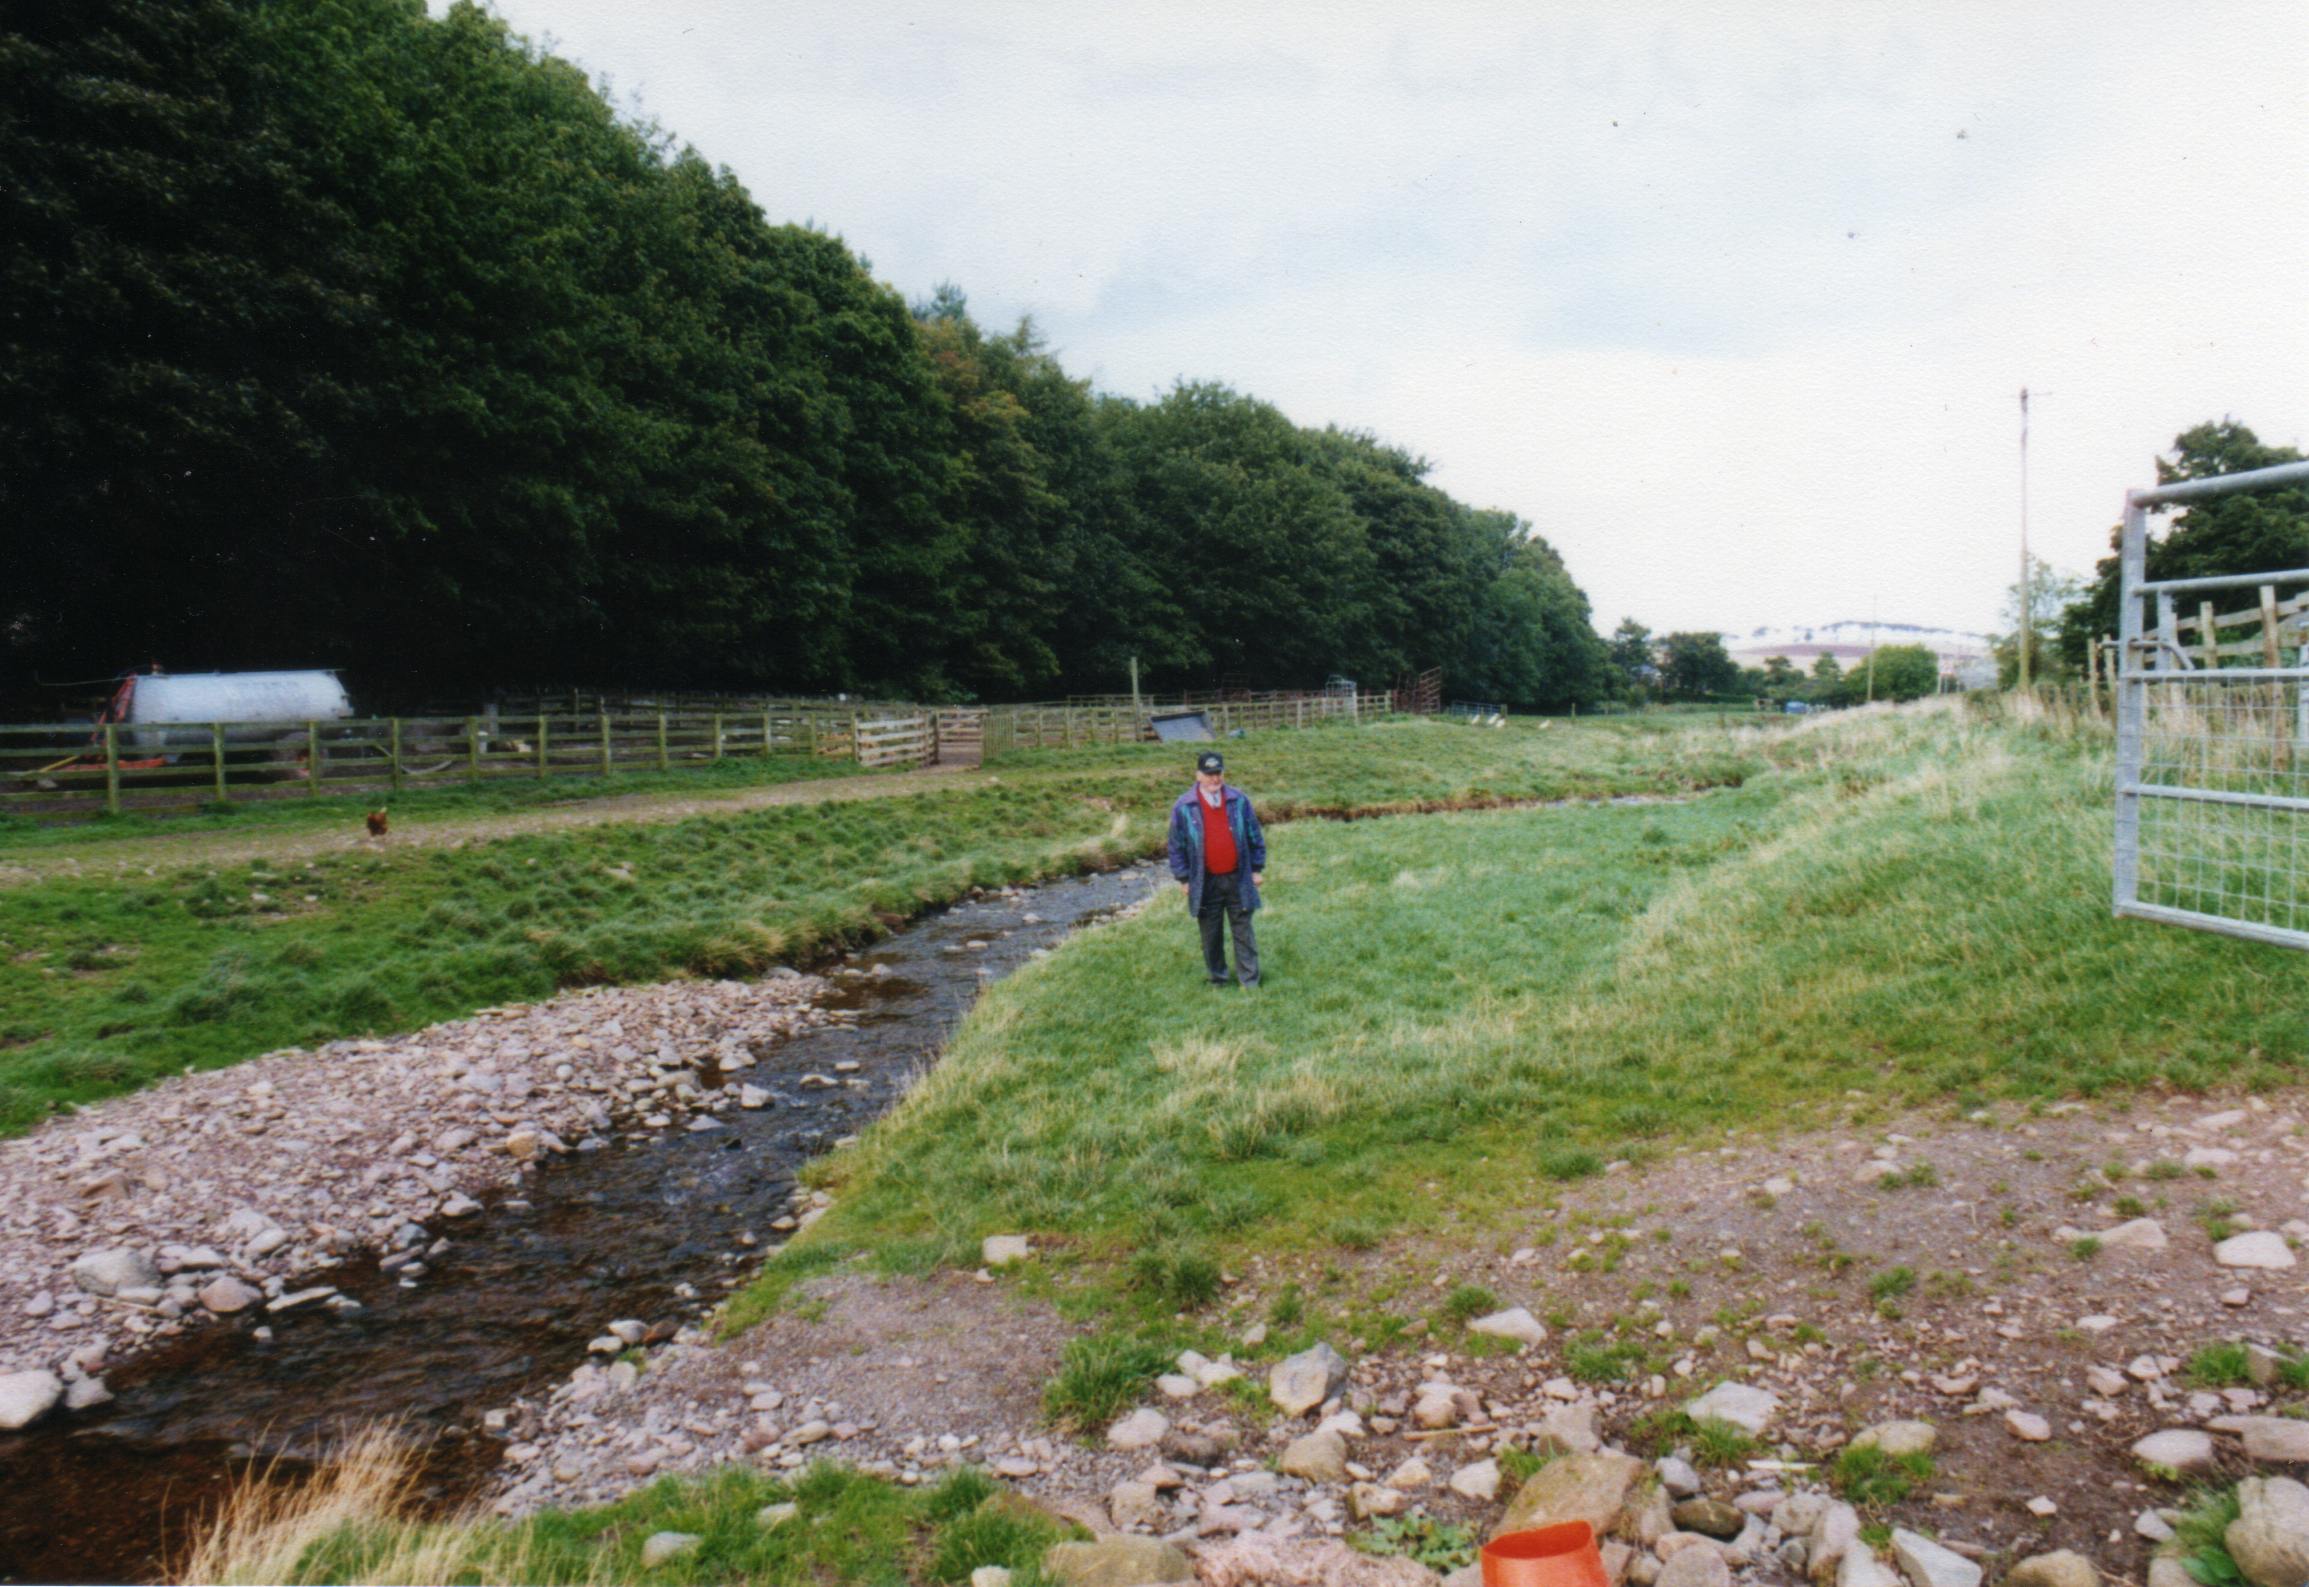  Lewis Jenkins on the site of the timber camp at Elmscleugh.jpg